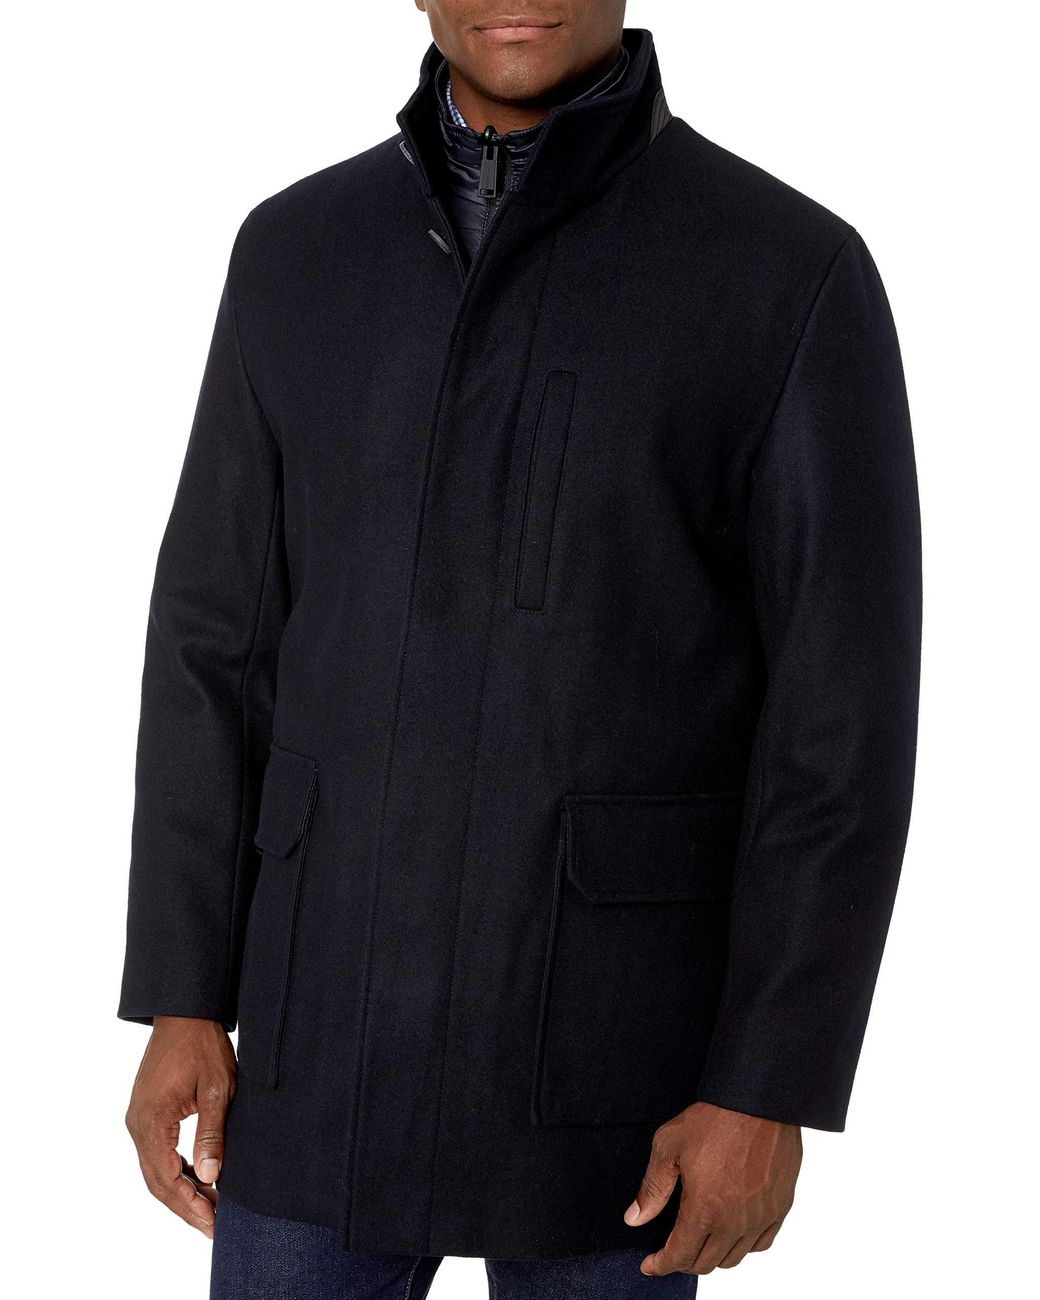 Cole Haan Melton Wool 3 In 1 Car Coat in Navy (Blue) for Men - Save 29% ...